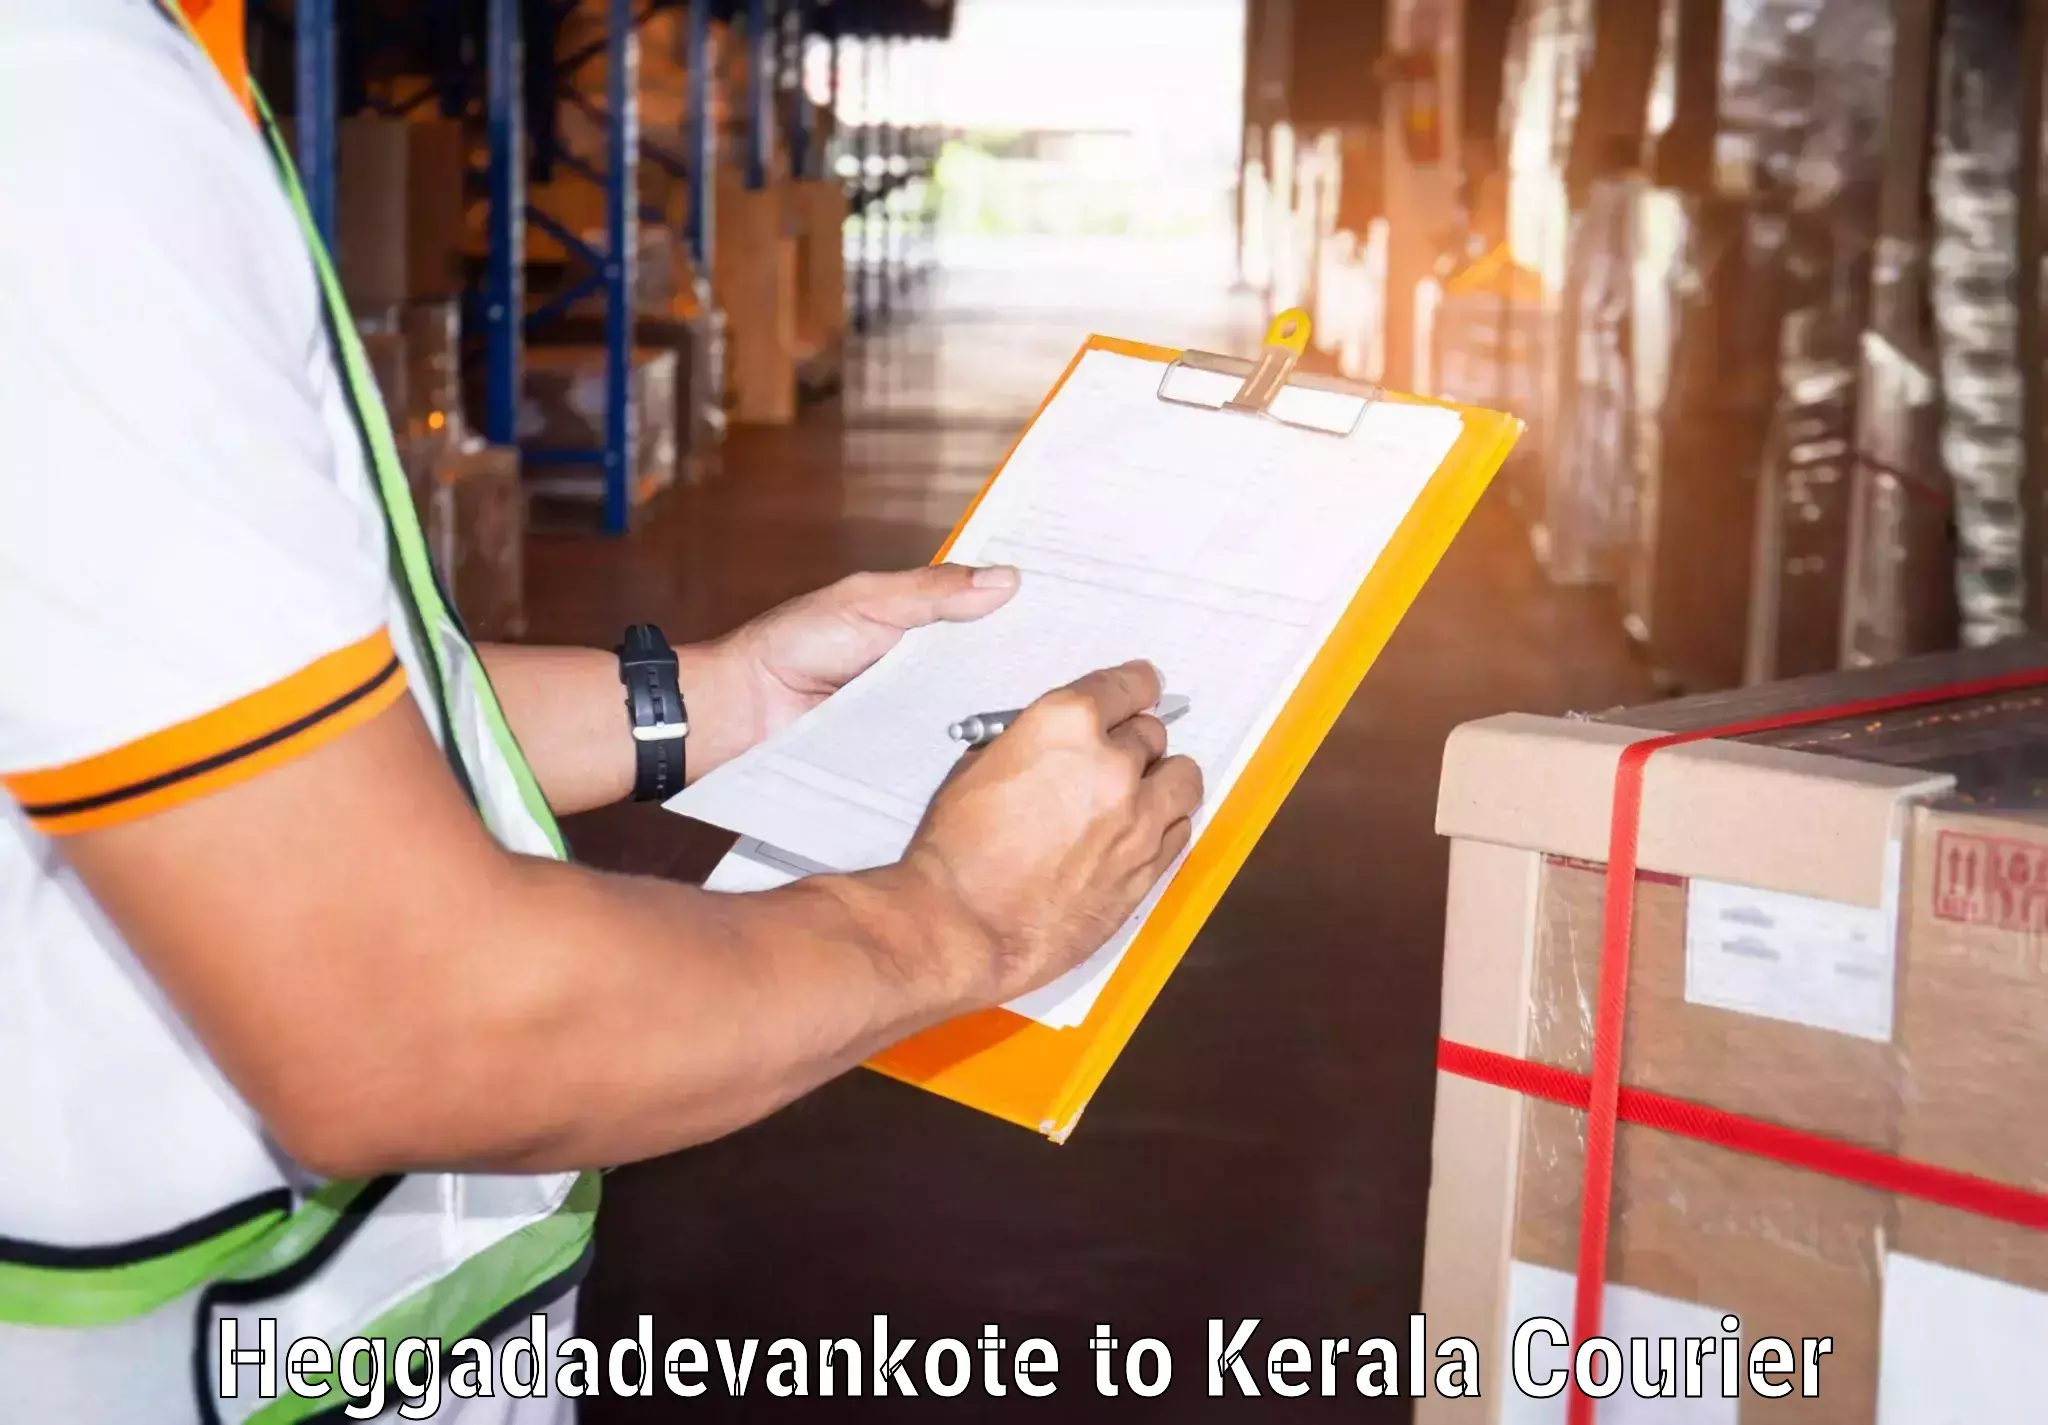 State-of-the-art courier technology in Heggadadevankote to Kochi